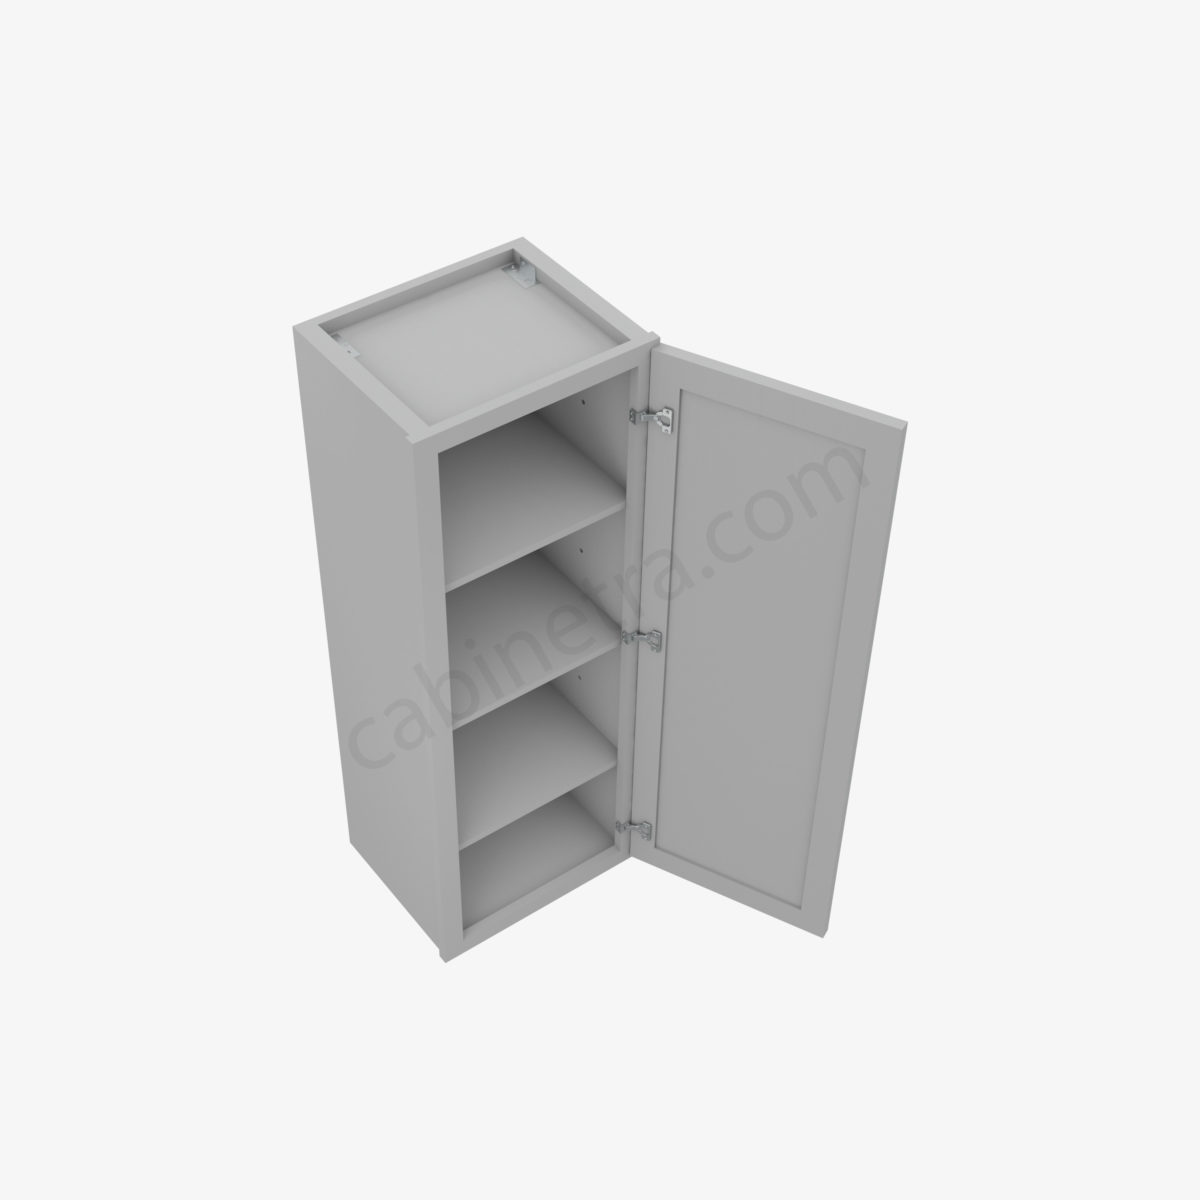 AB W1542 2 Forevermark Lait Gray Shaker Cabinetra scaled